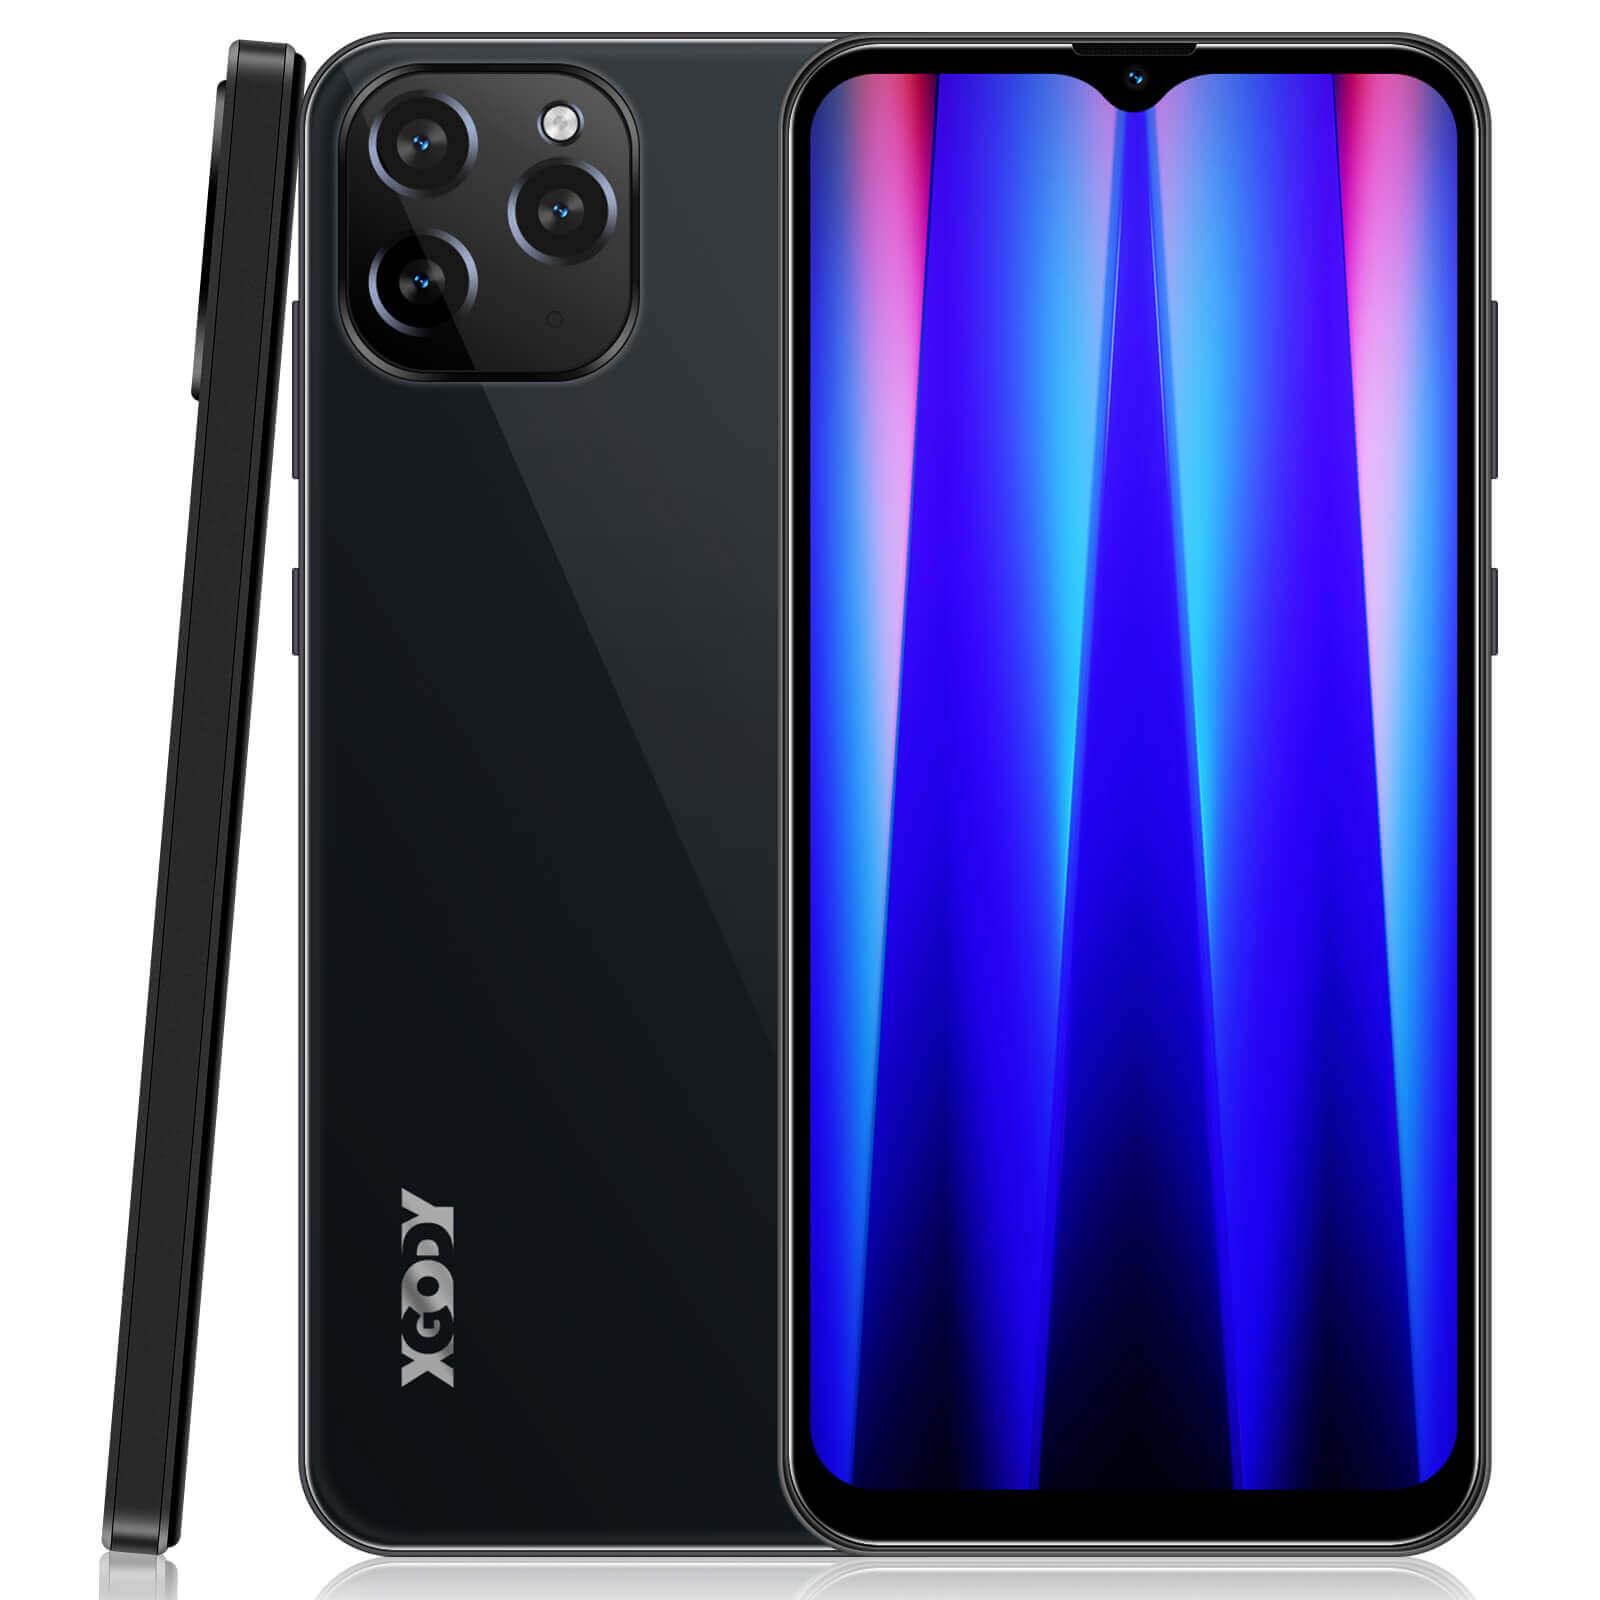 Cost-effective and Most worthwhile XGODY Y14, Quad Core, 4G LTE Dual SIM Unlocked Android Smartphone, 6.6’’ HD Waterdrop Display, 3000mAh Battery - XGODY 